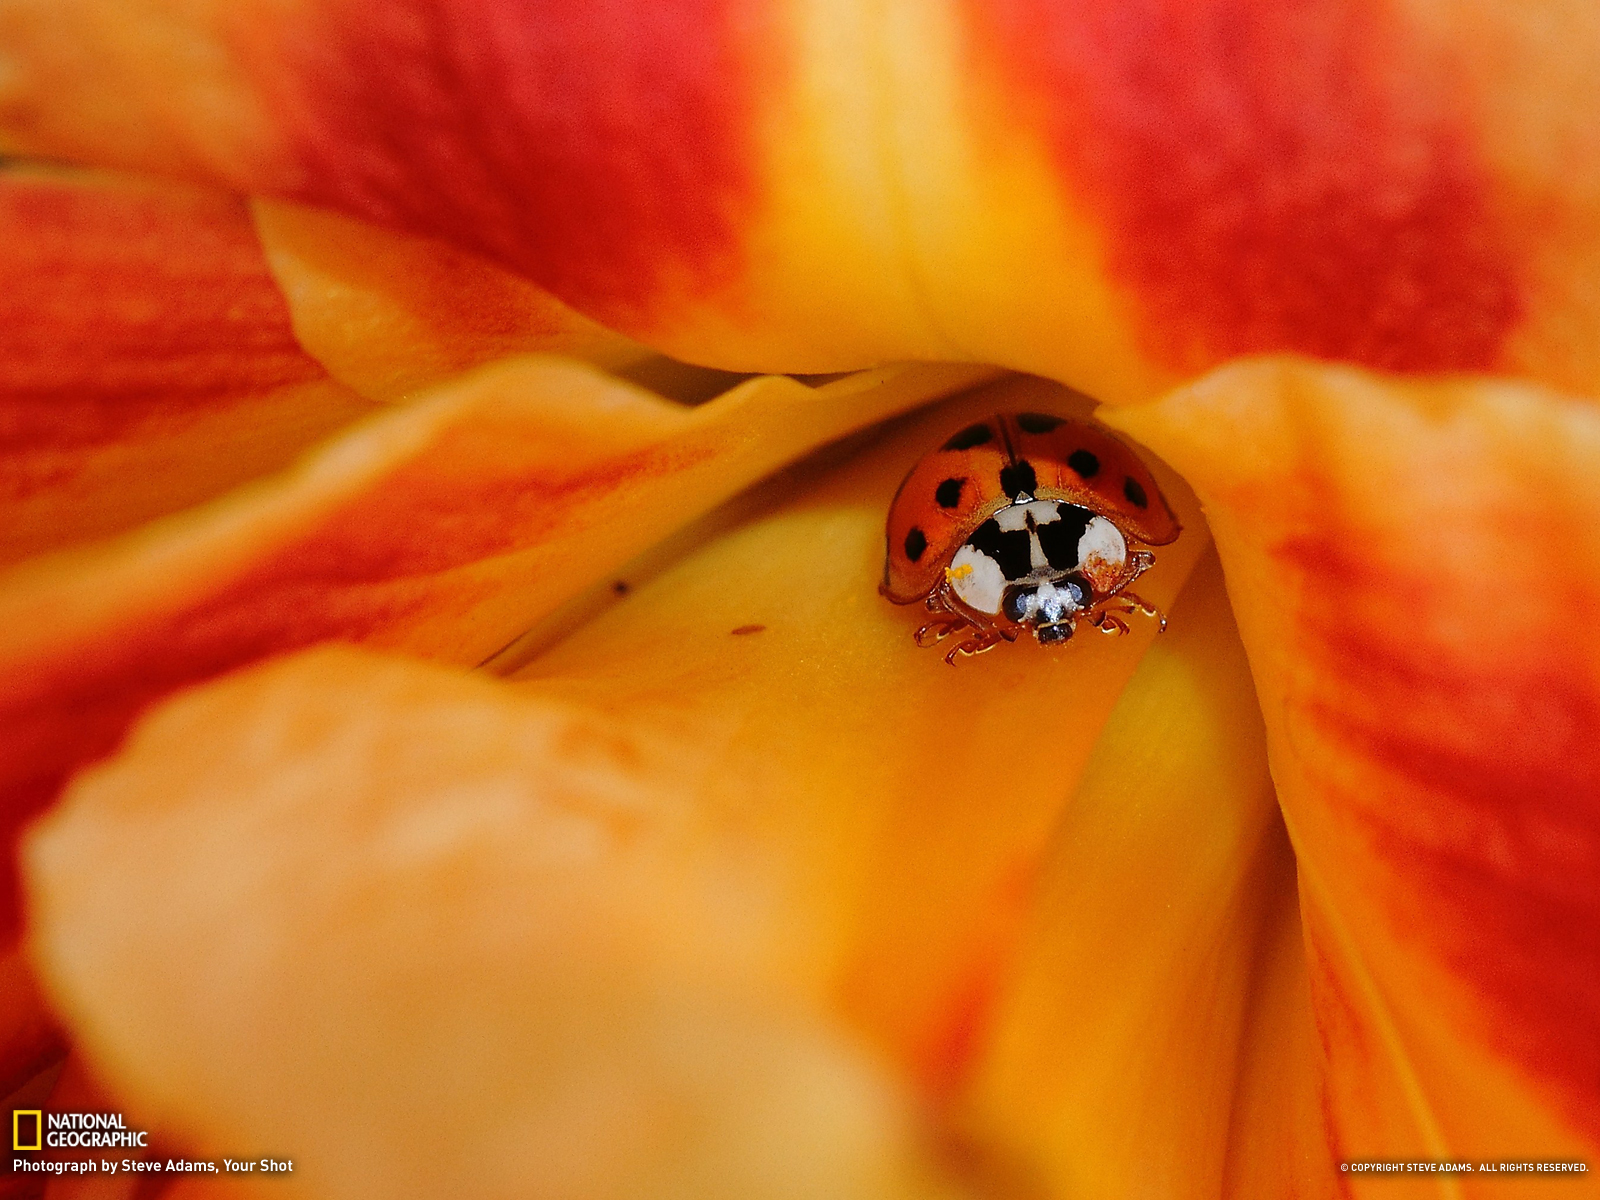 Picture Flower Wallpaper National Geographic Photo Of The Day